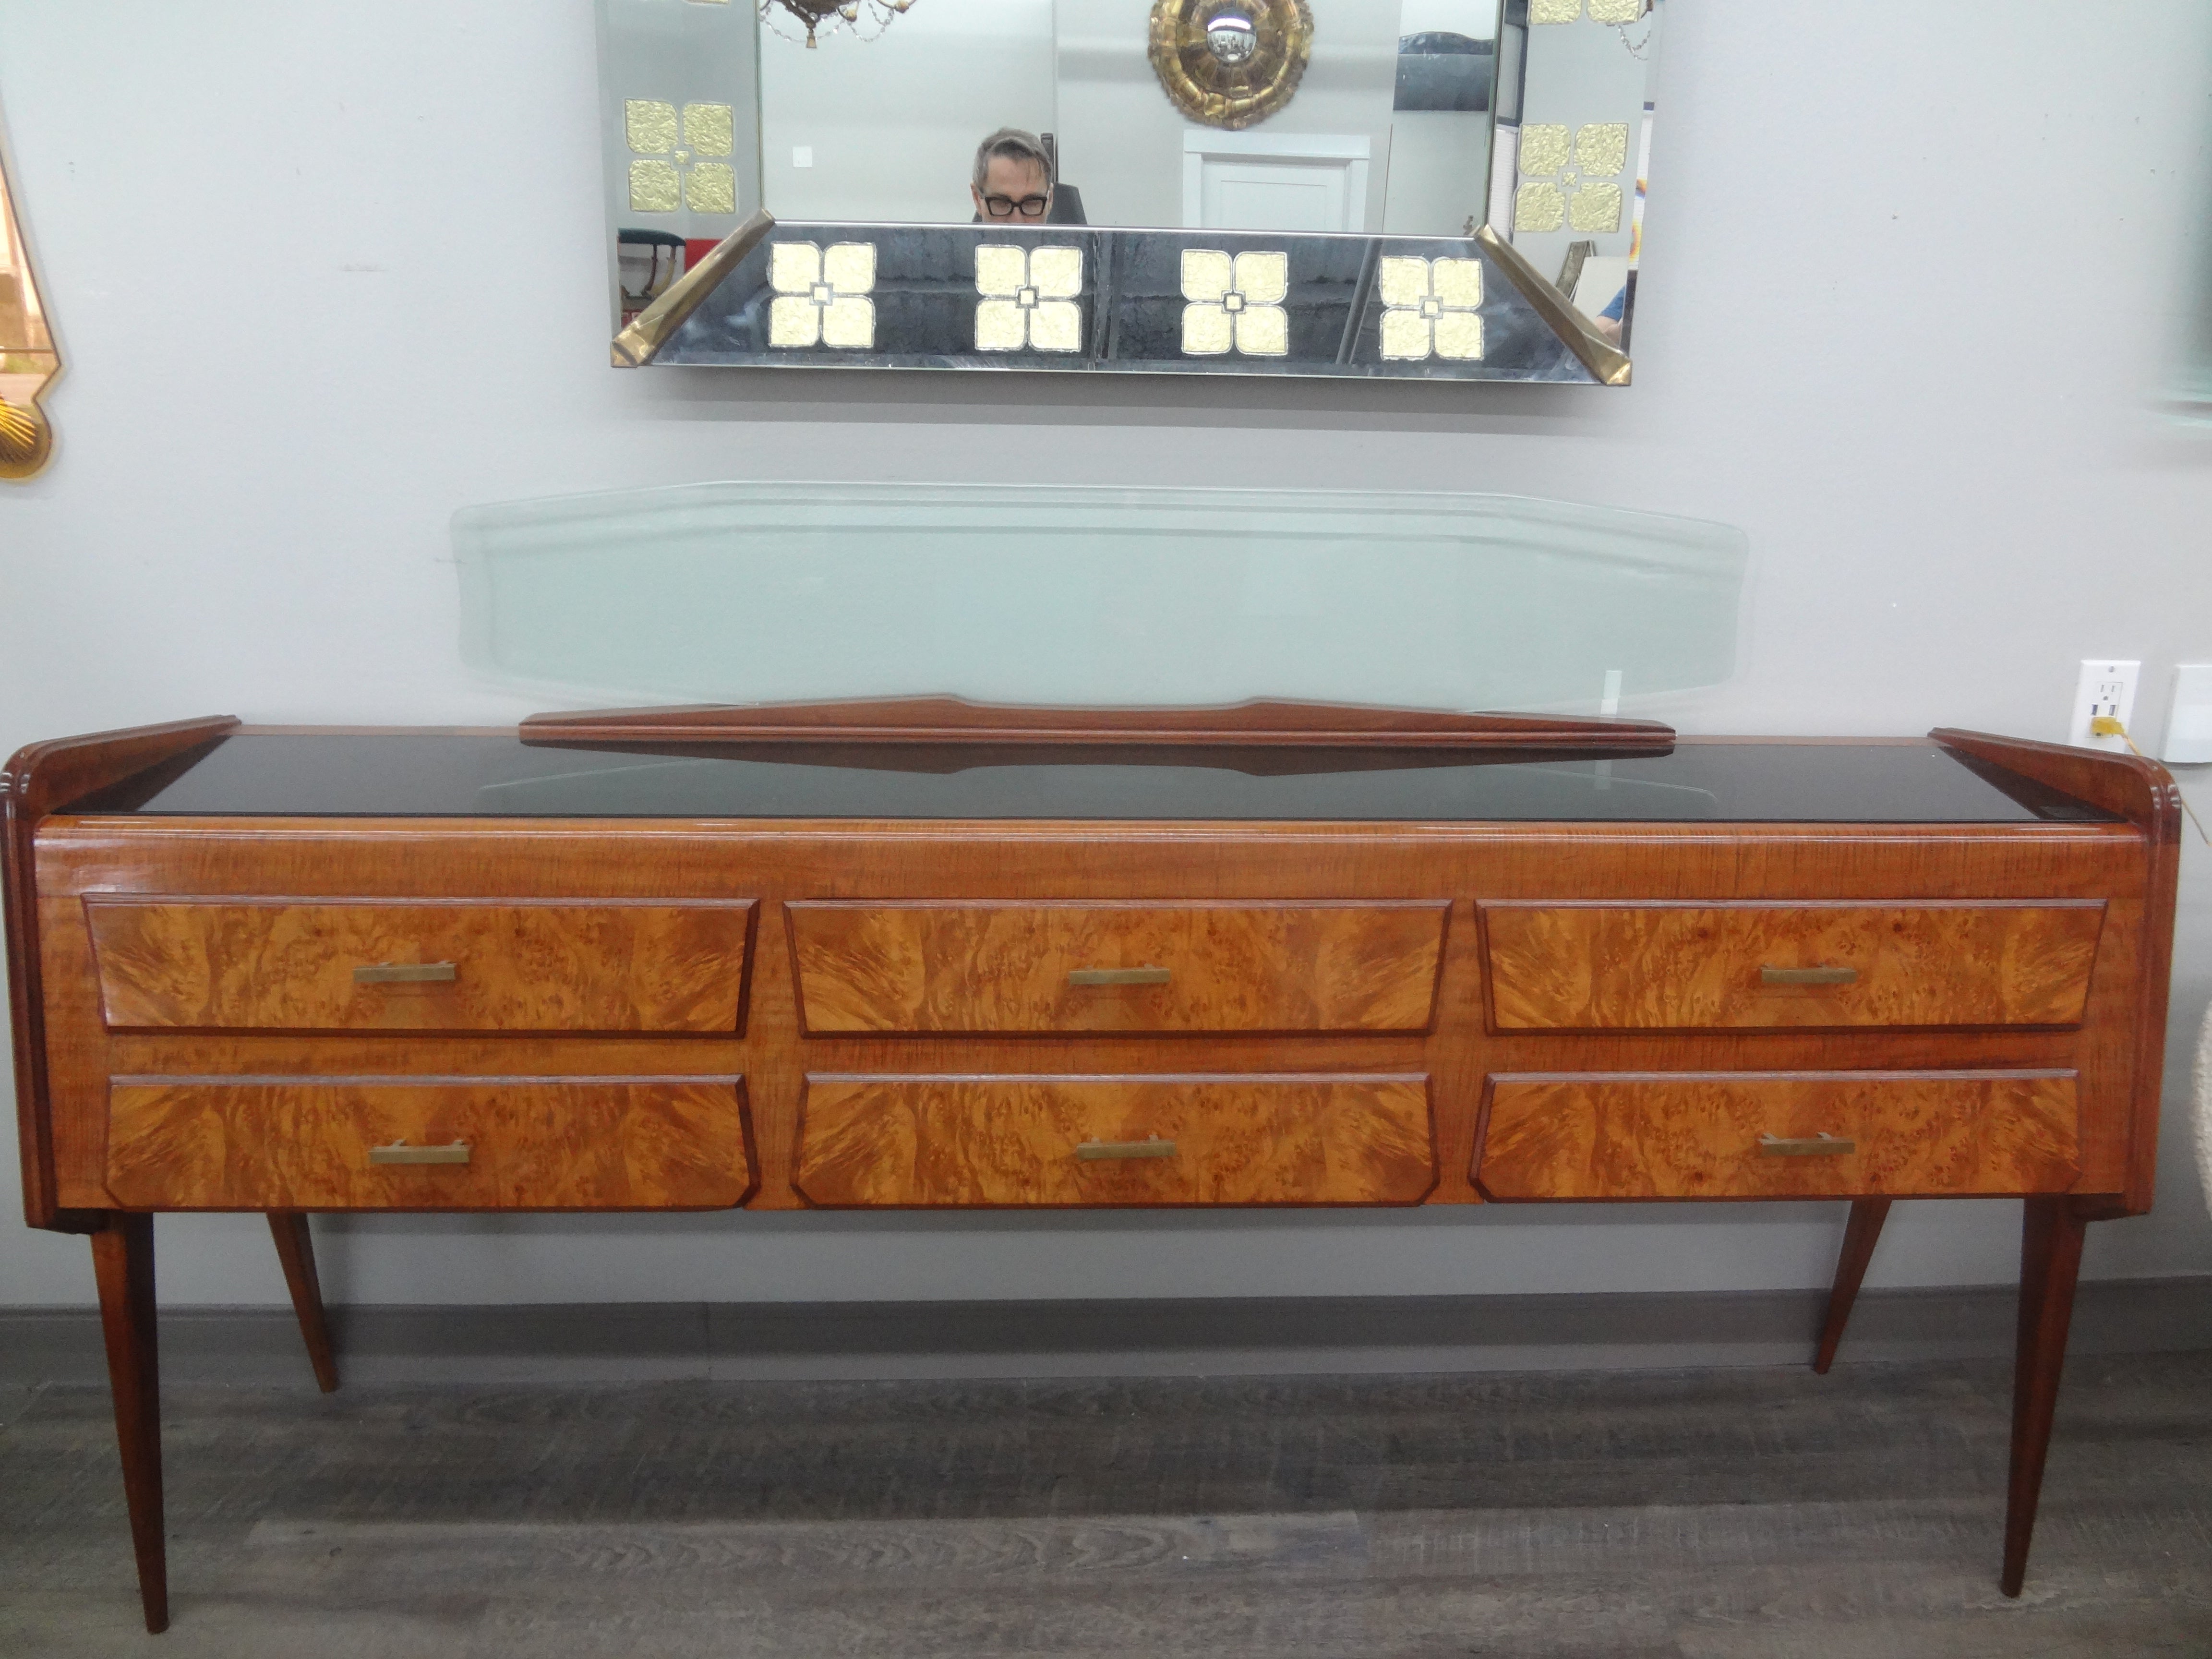 Italian Modern credenza after Ico Parisi.
This stunning Italian Mid-Century Modern credenza, commode or console table has shapely legs, six drawers with brass hardware and an interesting clear glass backplate.
This outstanding credenza is Italian